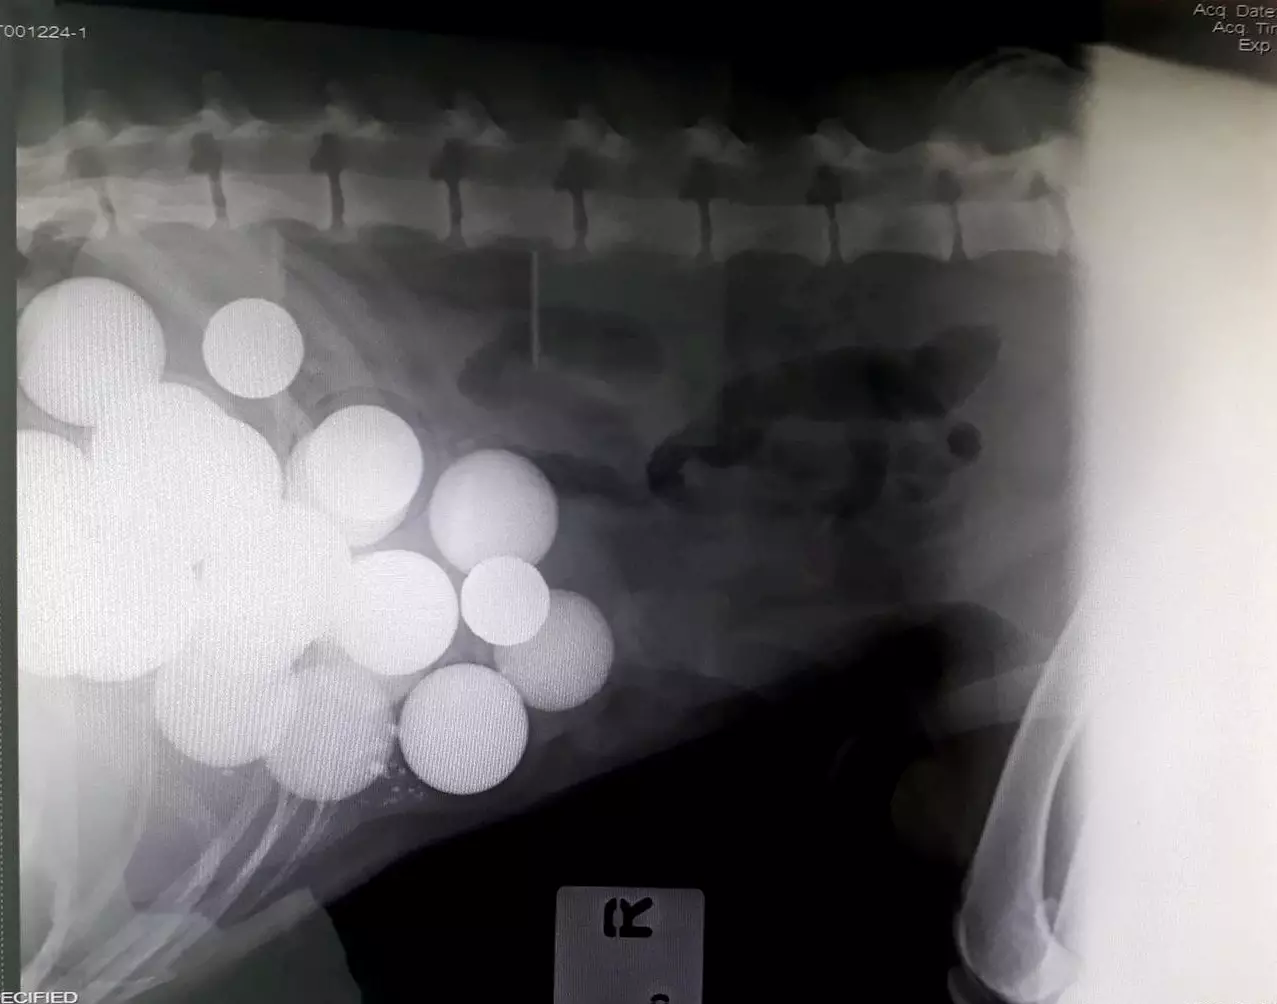 The golf balls showed up during an x-ray (